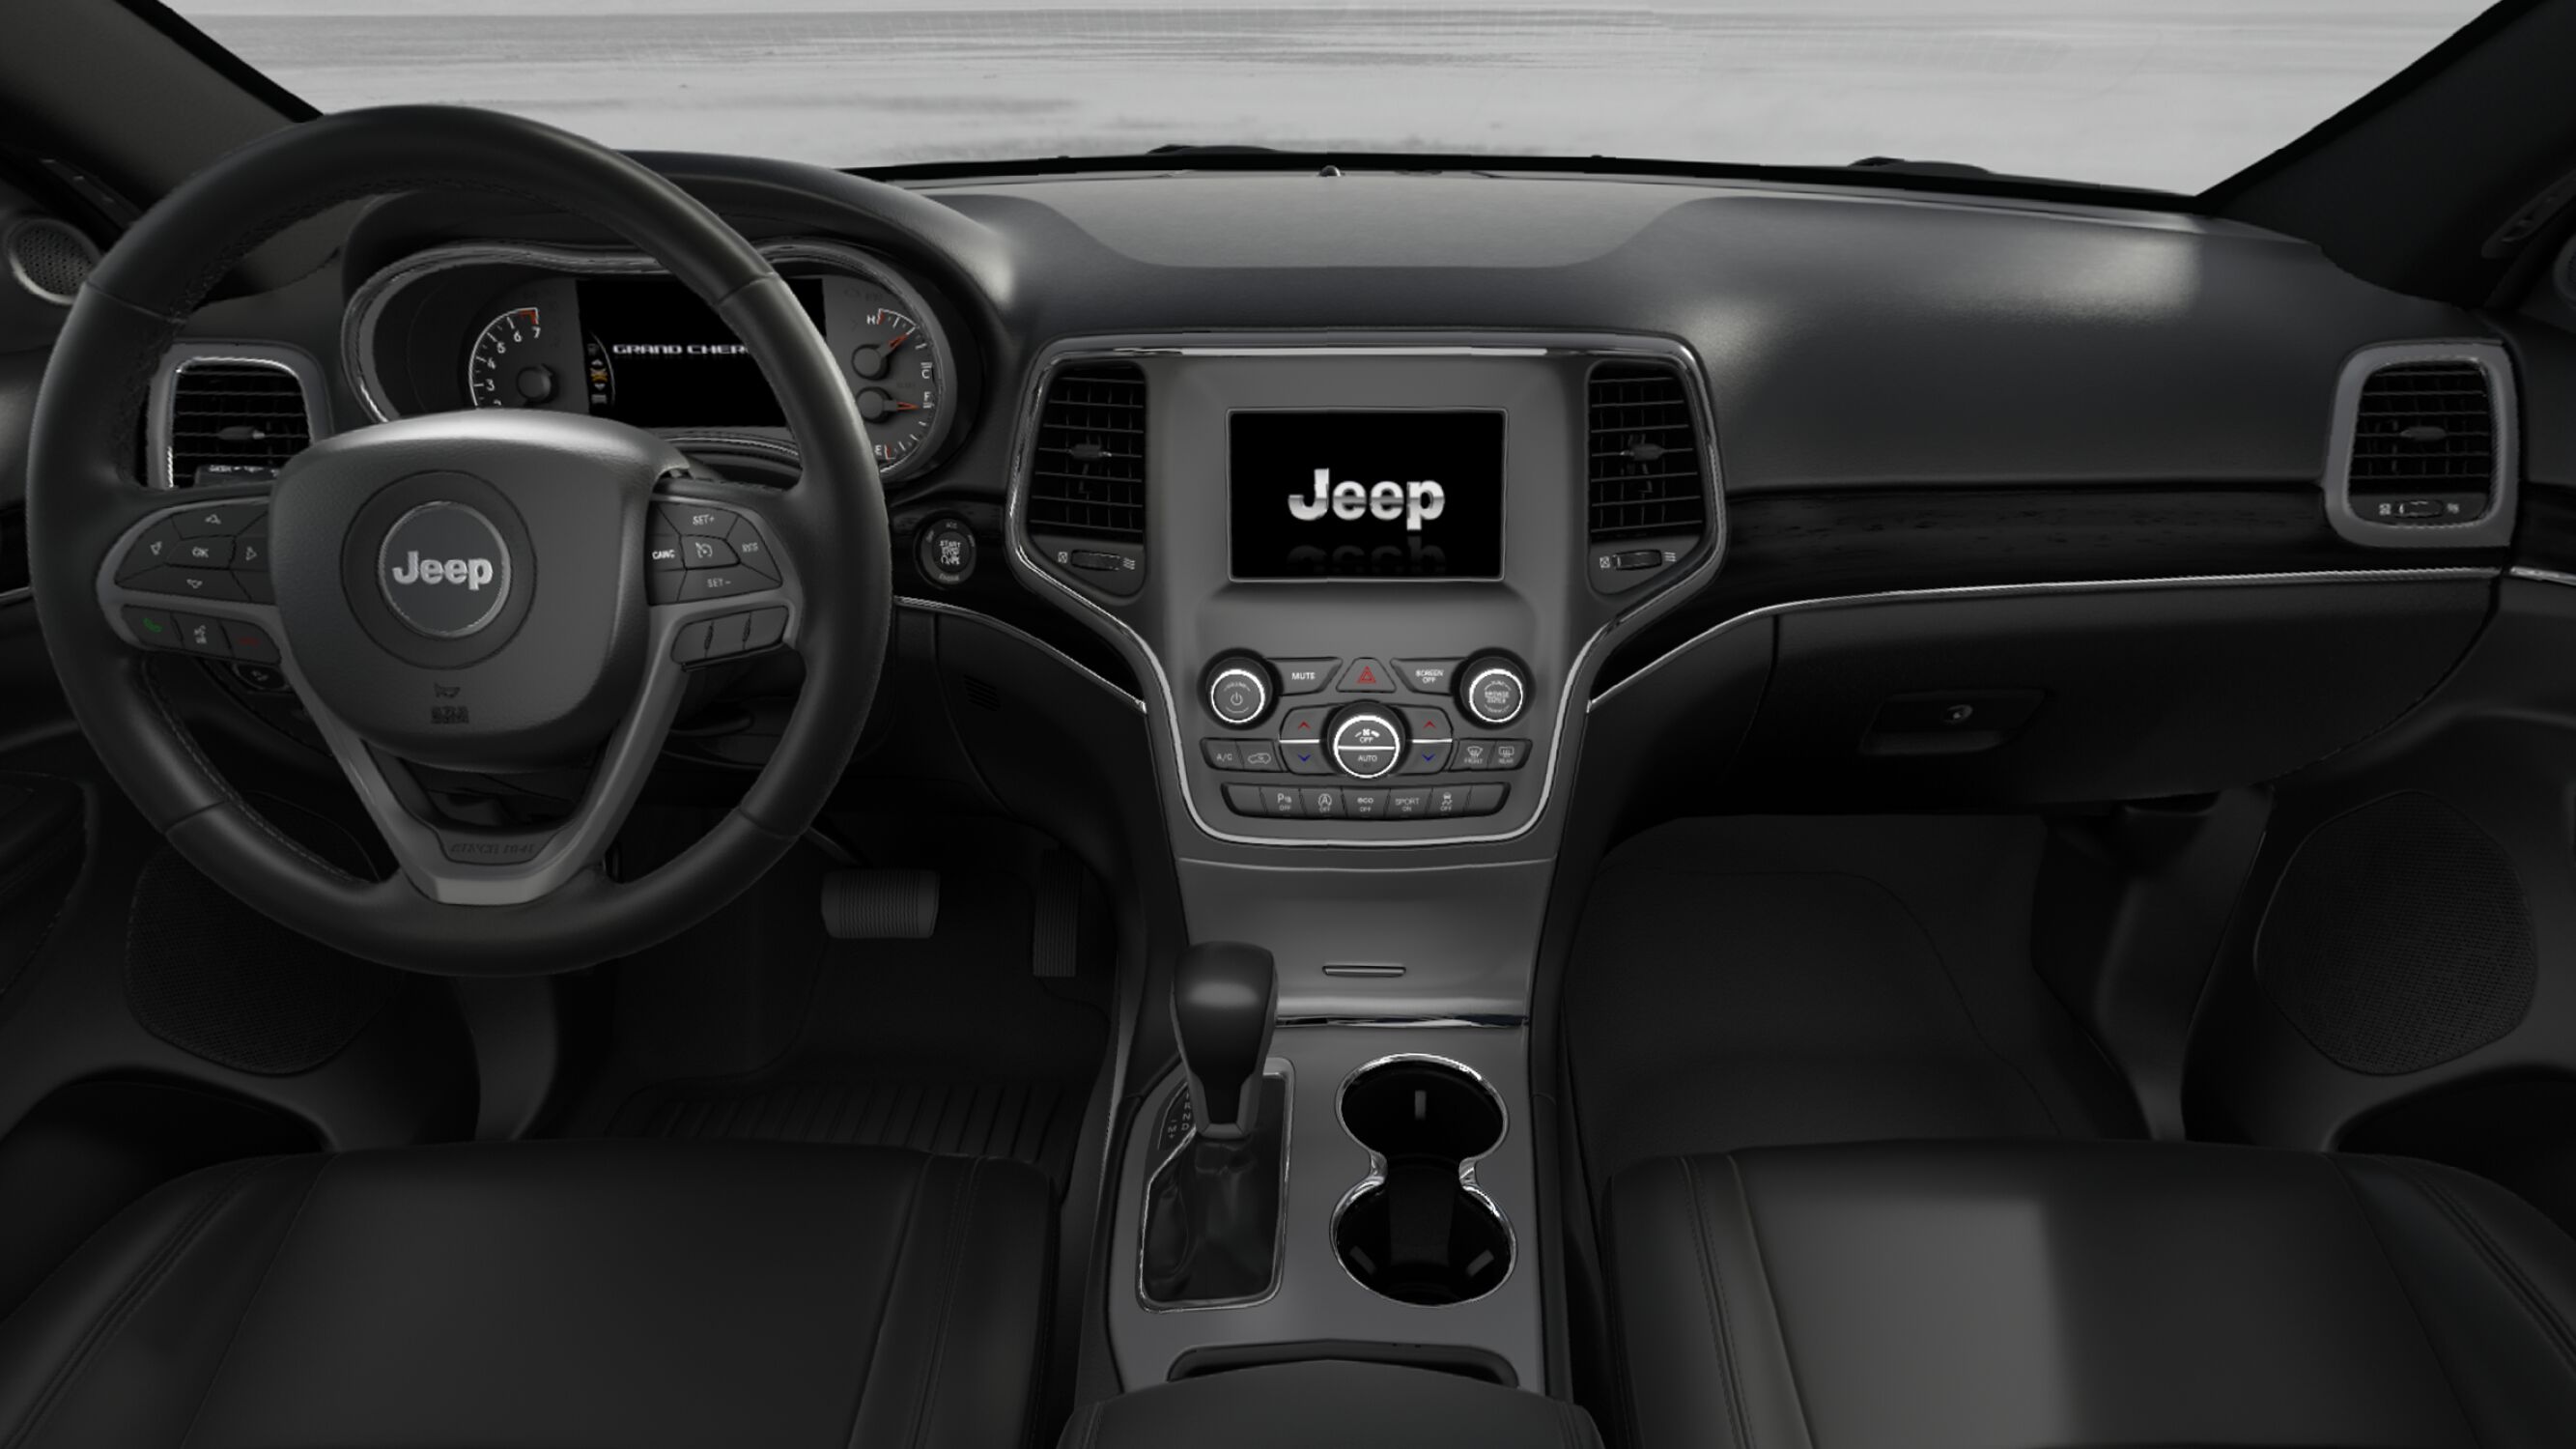 2018 Jeep Grand Chreokee Limited Front Interior Steering Wheel and Dash